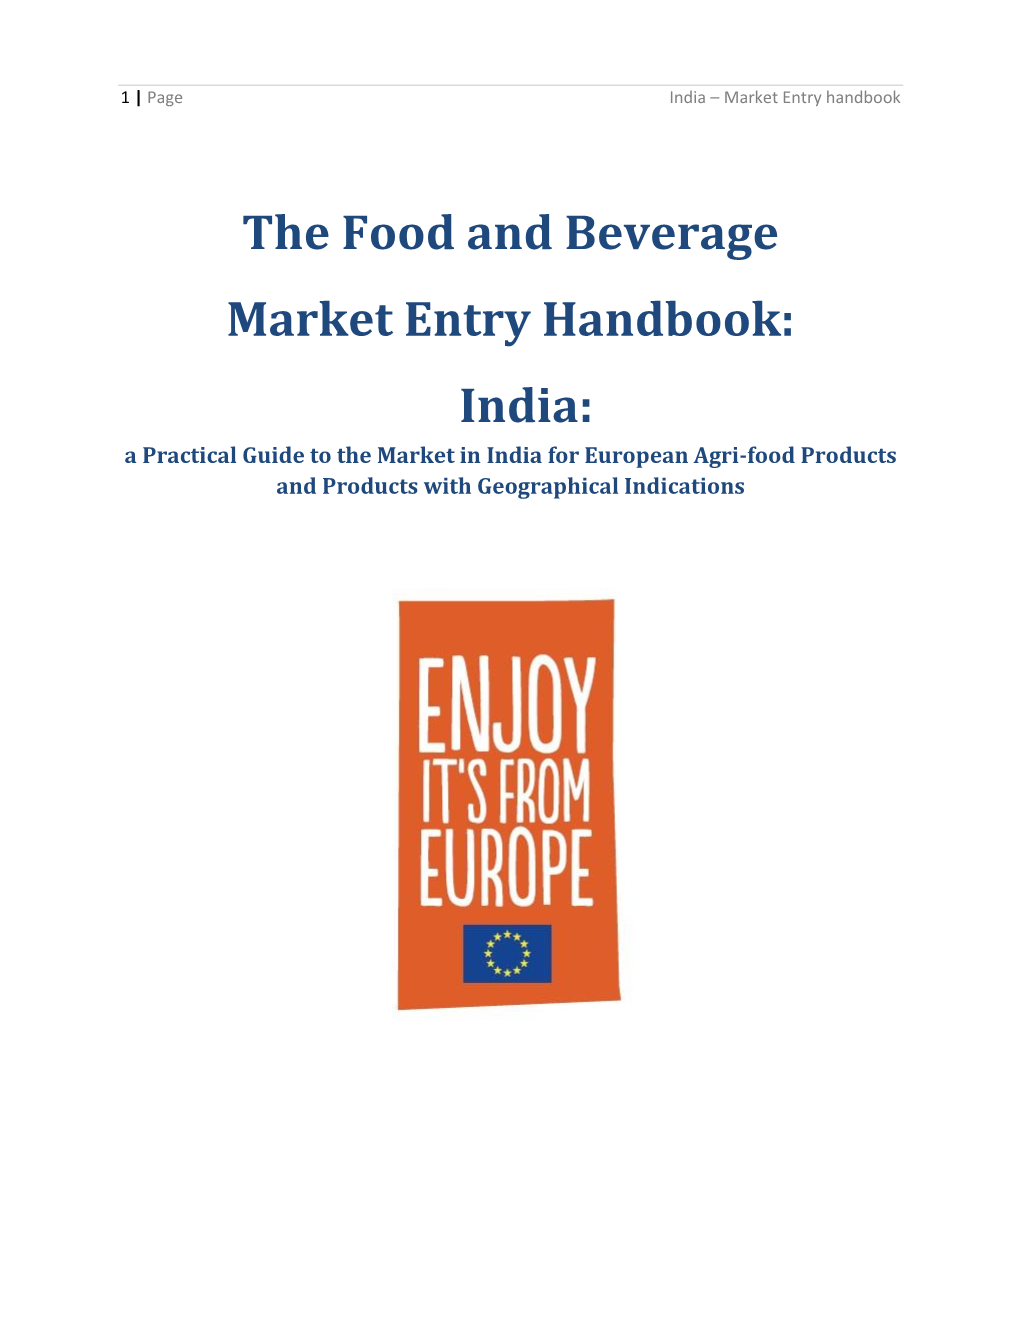 The Food and Beverage Market Entry Handbook: India